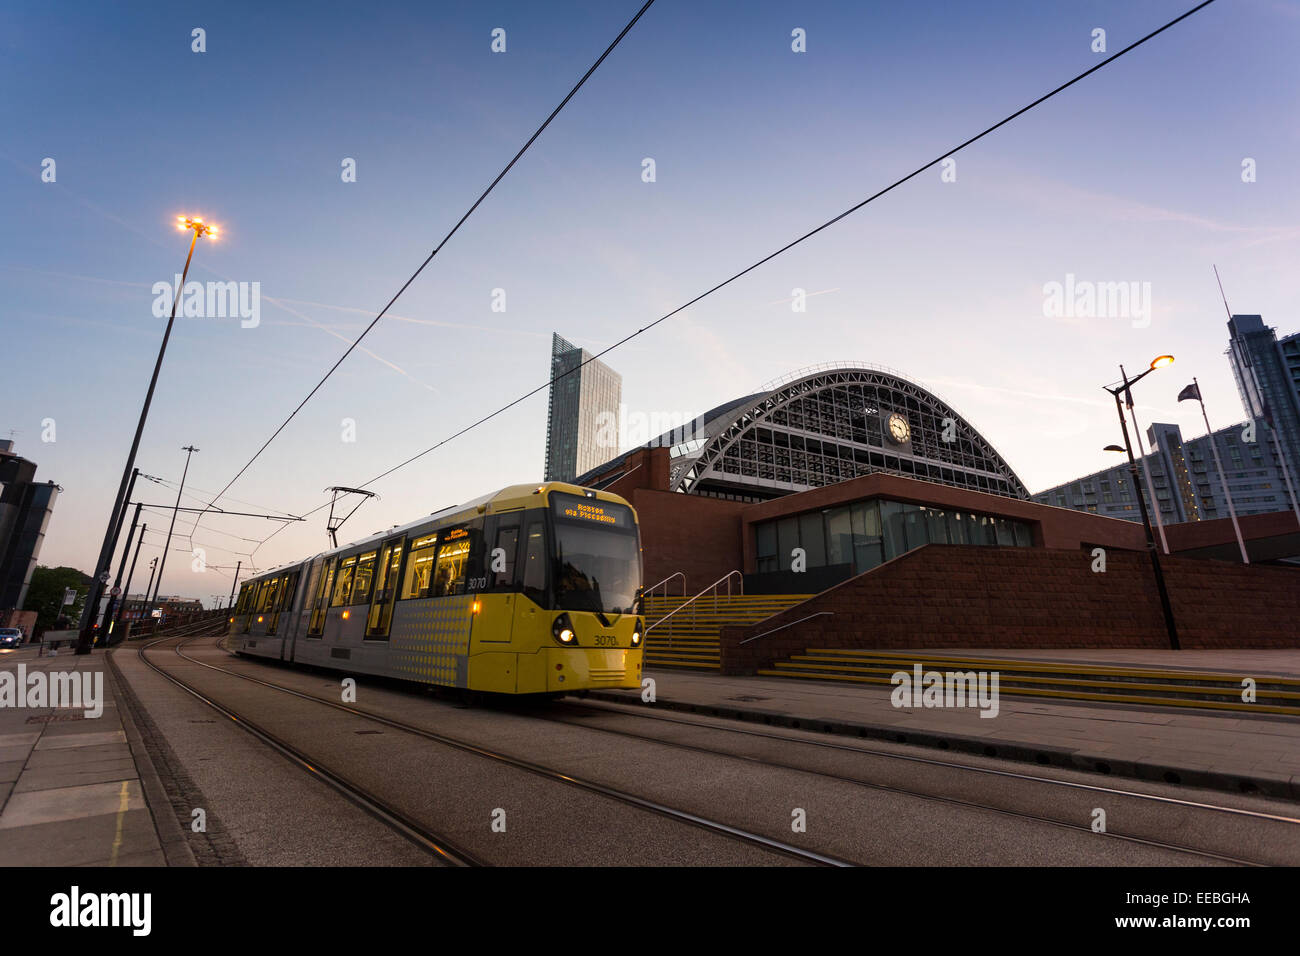 England, Manchester, Metrolink tram and Manchester Convention Centre at twilight Stock Photo